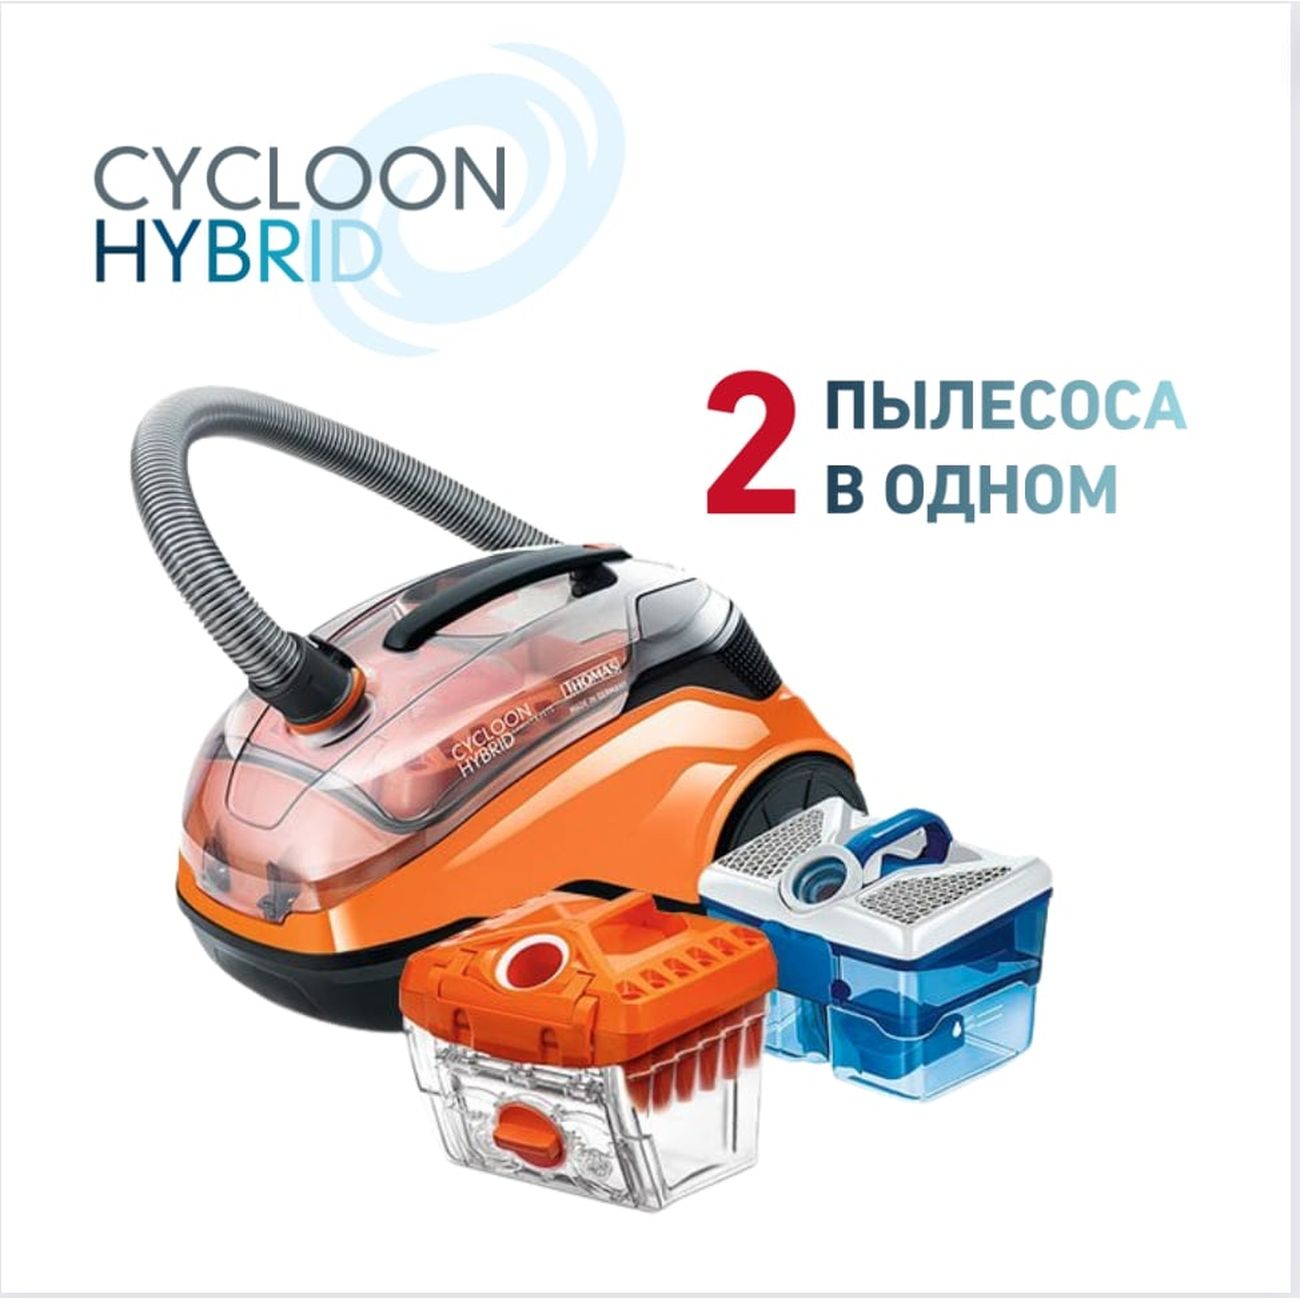 Cycloon hybrid. Пылесос Thomas cycloon Hybrid Family & Pets. Пылесос Thomas Aqua Pet & Family. Пылесос Thomas perfect Air Allergy Pure. Пылесос Thomas Aqua Plus Pet and Family.